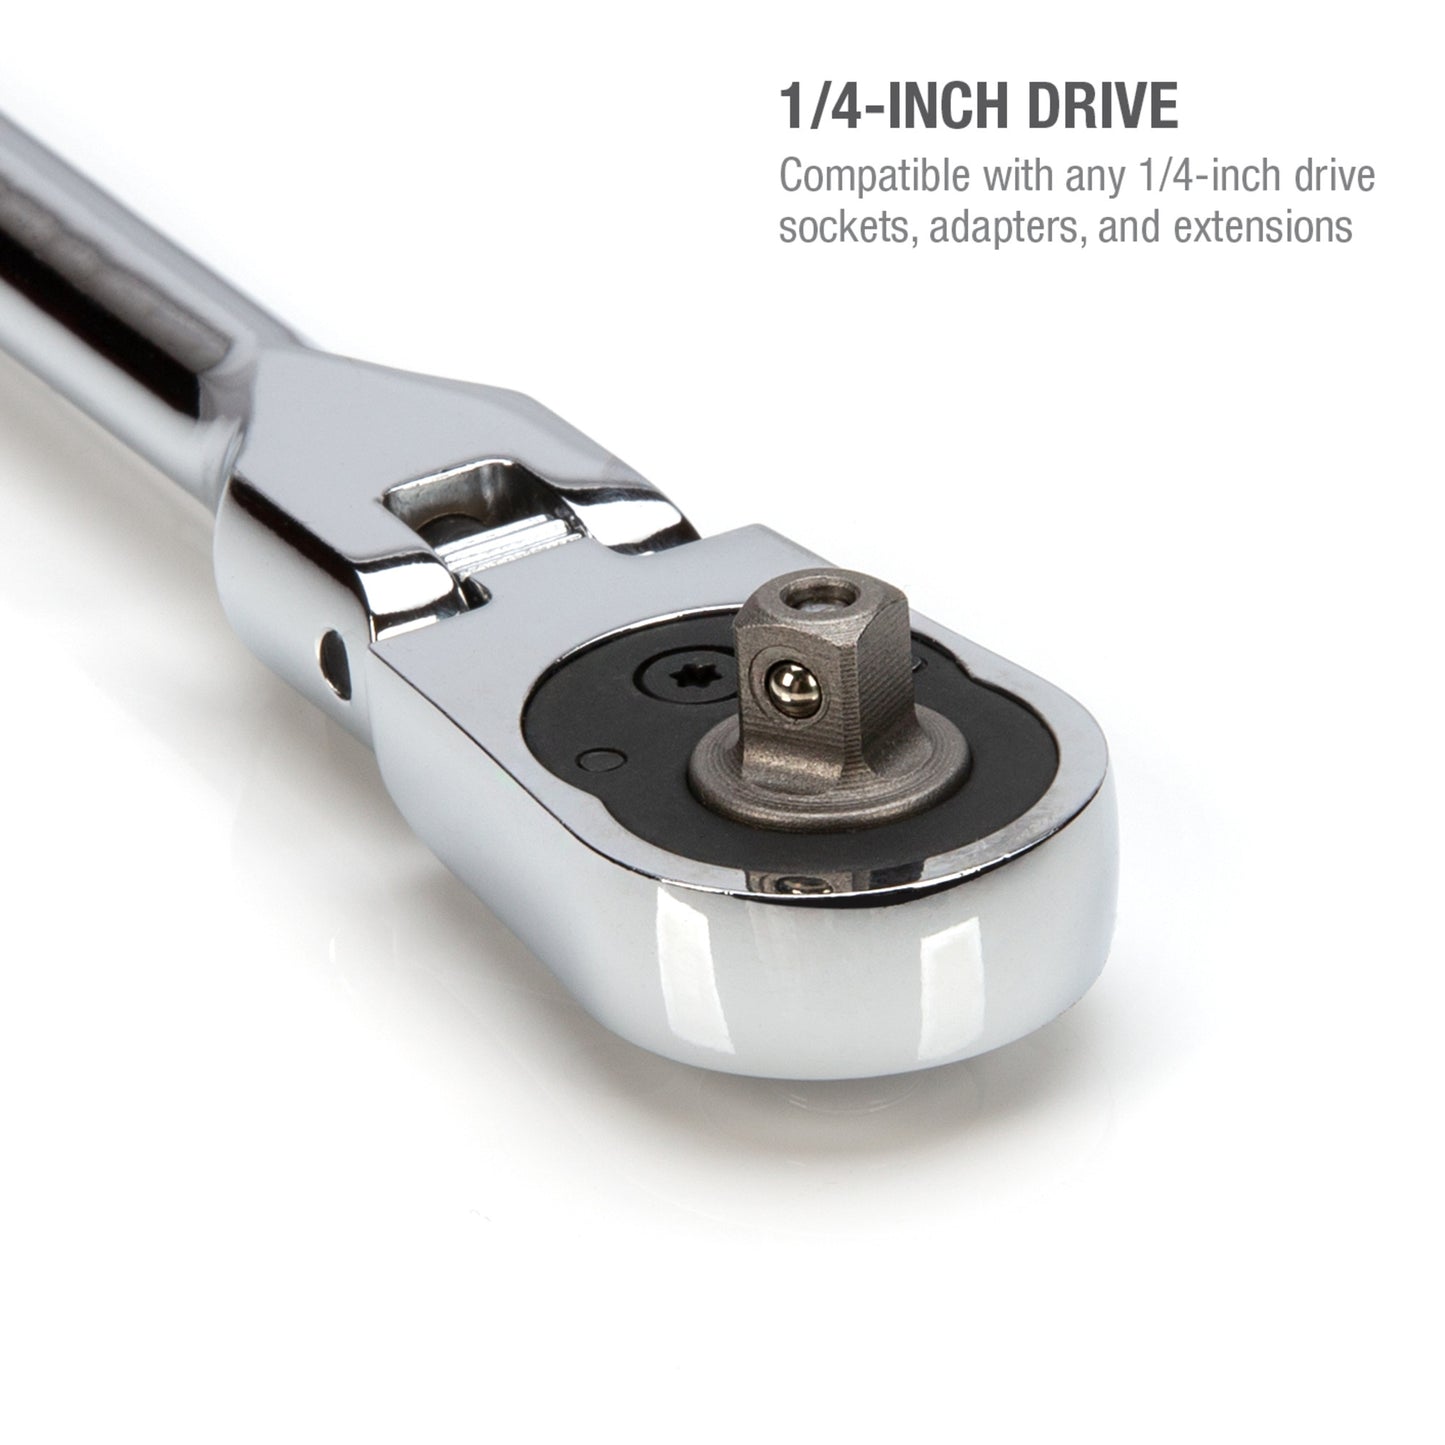 1/4-Inch Drive 72-Tooth 180-Degree Flex-Head Reversible Quick-Release Ratchet with 12-Inch Long Full Polish Handle